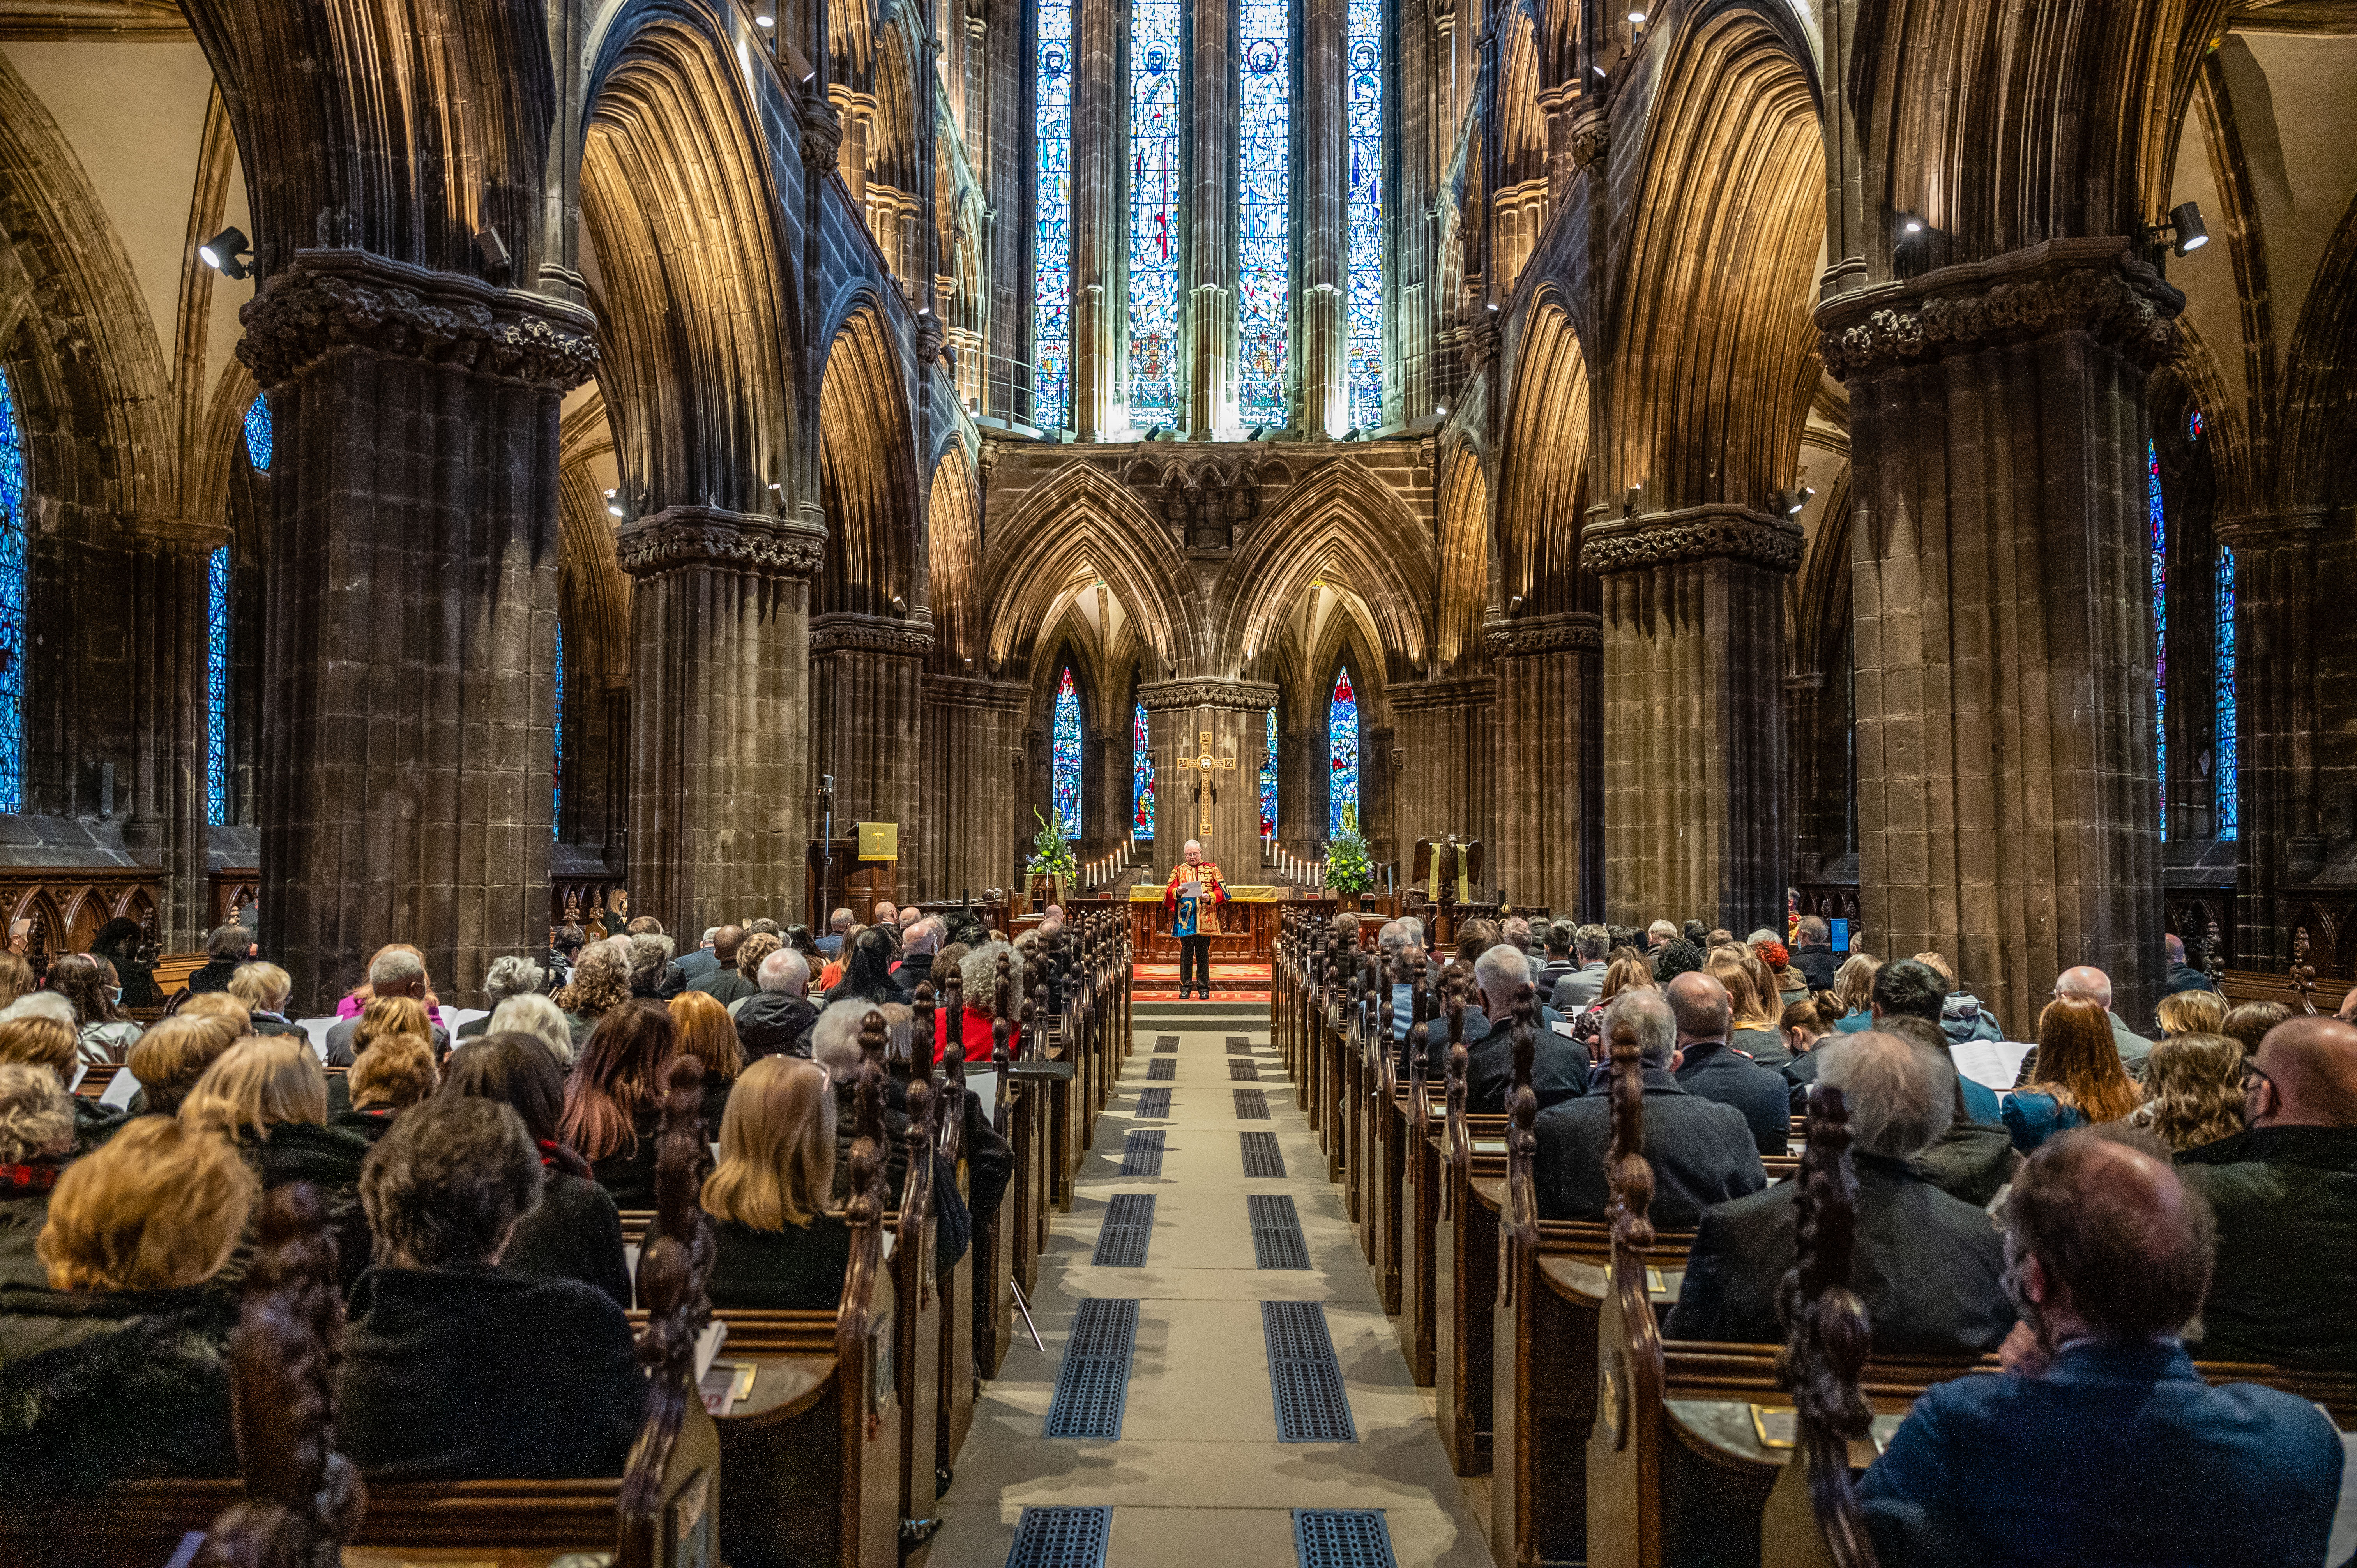 Worshippers attend an ecumenical service Nov. 7, 2021, at the medieval Glasgow Cathedral, consecrated in 1197. The service was in recognition of COP26, the U.N. Climate Conference. Photo by John Young/Church of Scotland